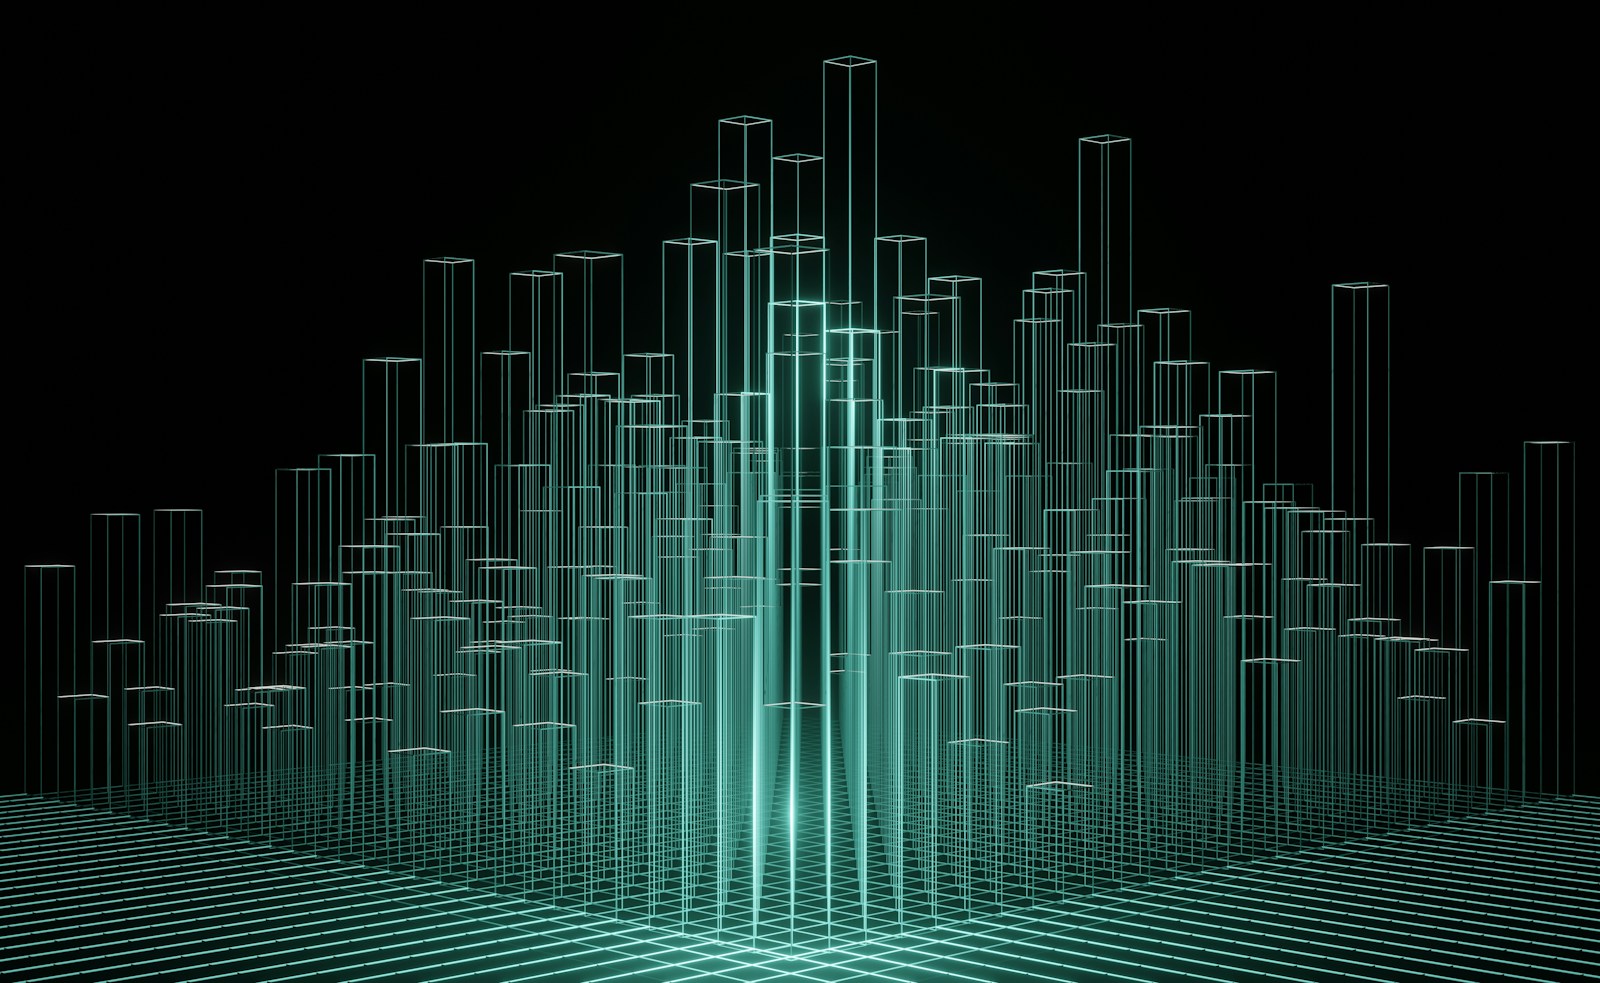 an abstract image of a city made up of lines